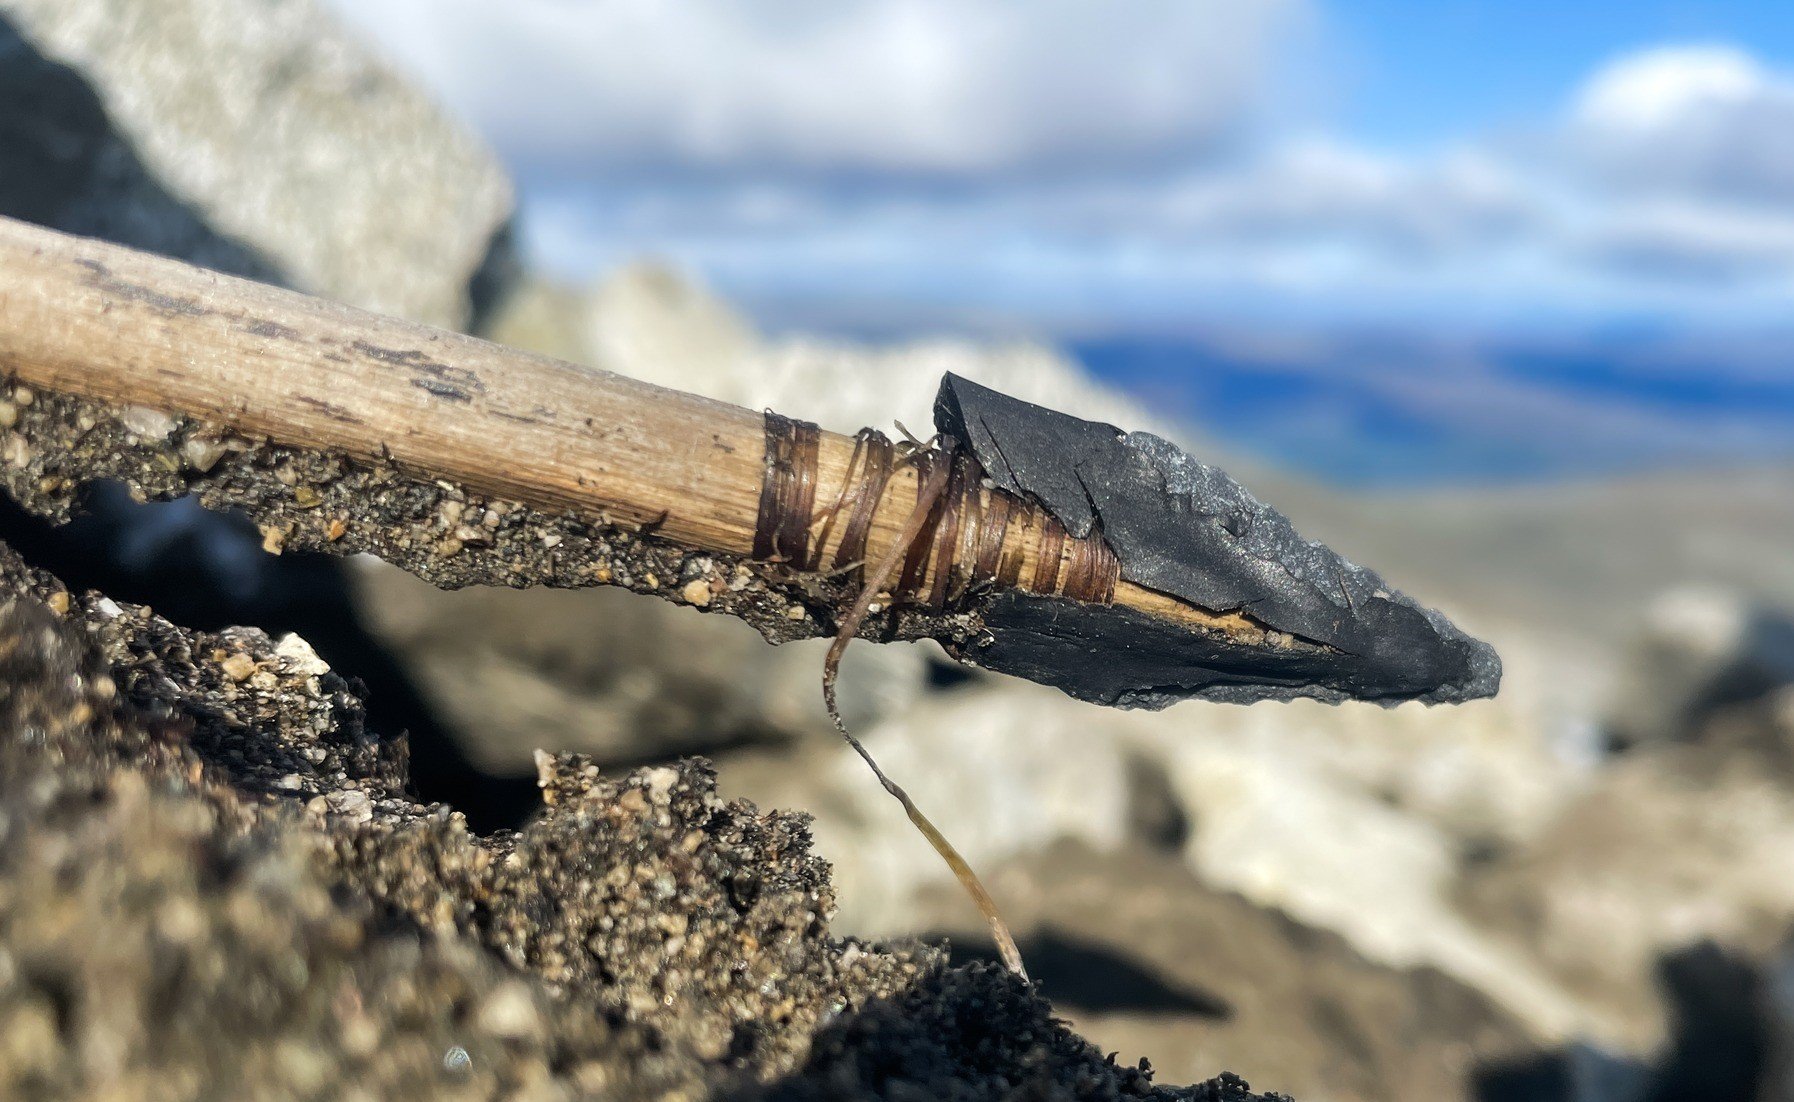  a well-preserved bronze age arrow in Norway